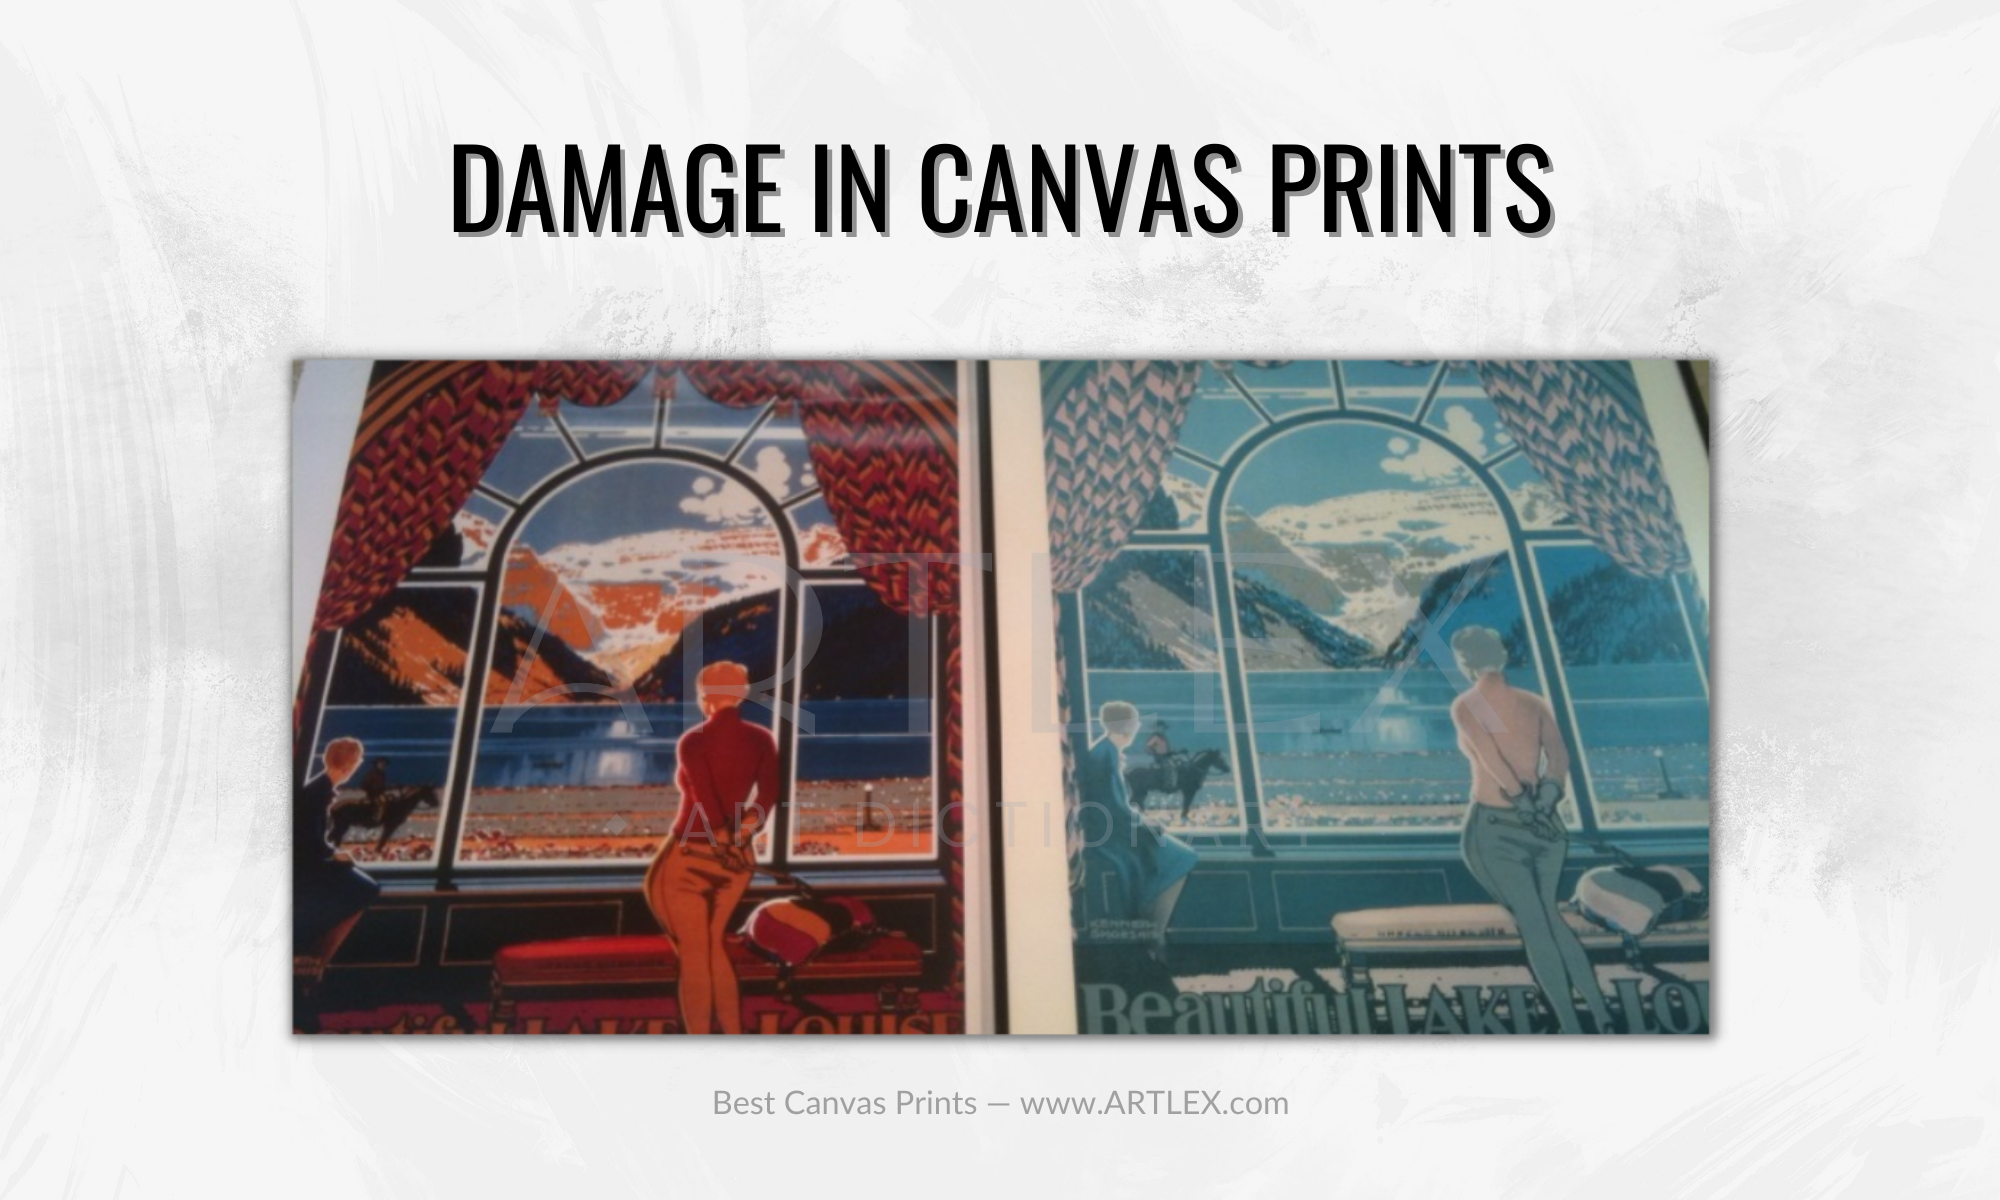 Damage in Canvas Prints